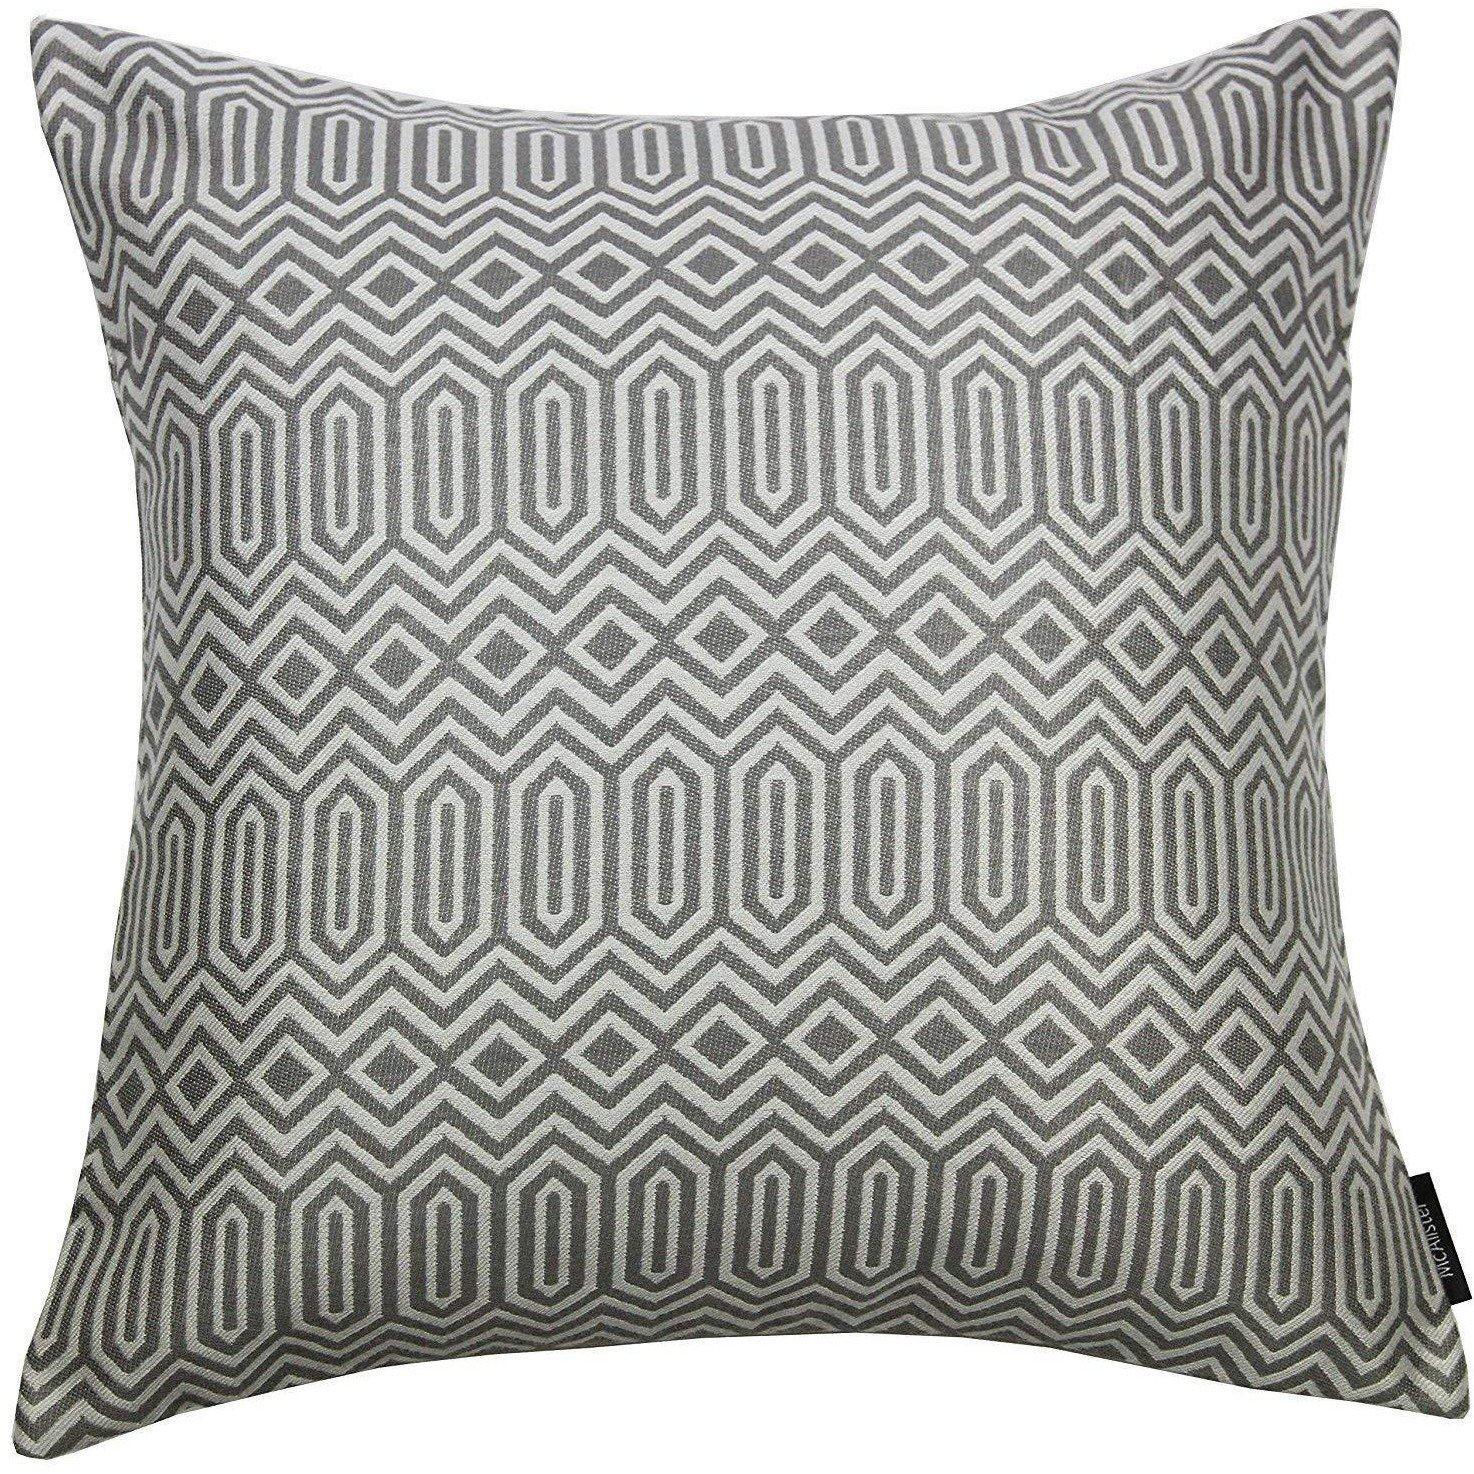 McAlister Textiles Colorado Geometric Charcoal Grey Cushion Cushions and Covers Polyester Filler 43cm x 43cm 